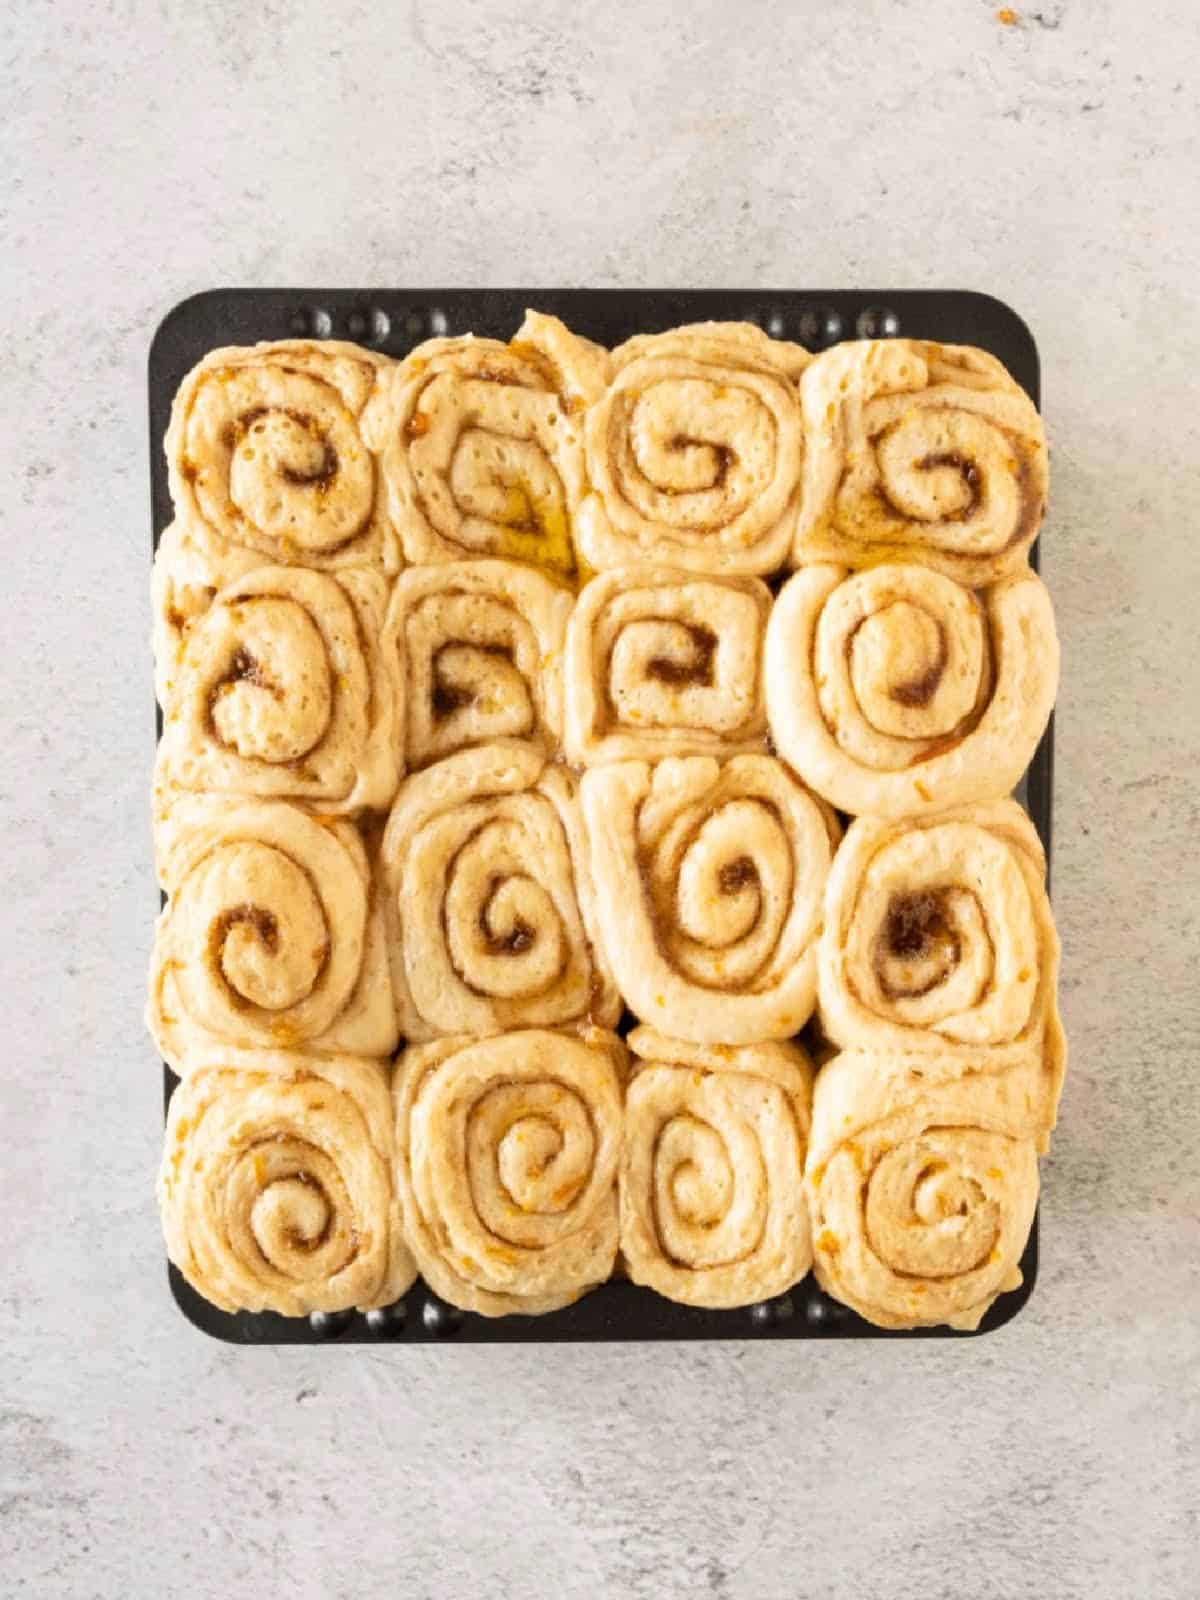 Proofed cinnamon rolls in a black pan on a light gray surface.